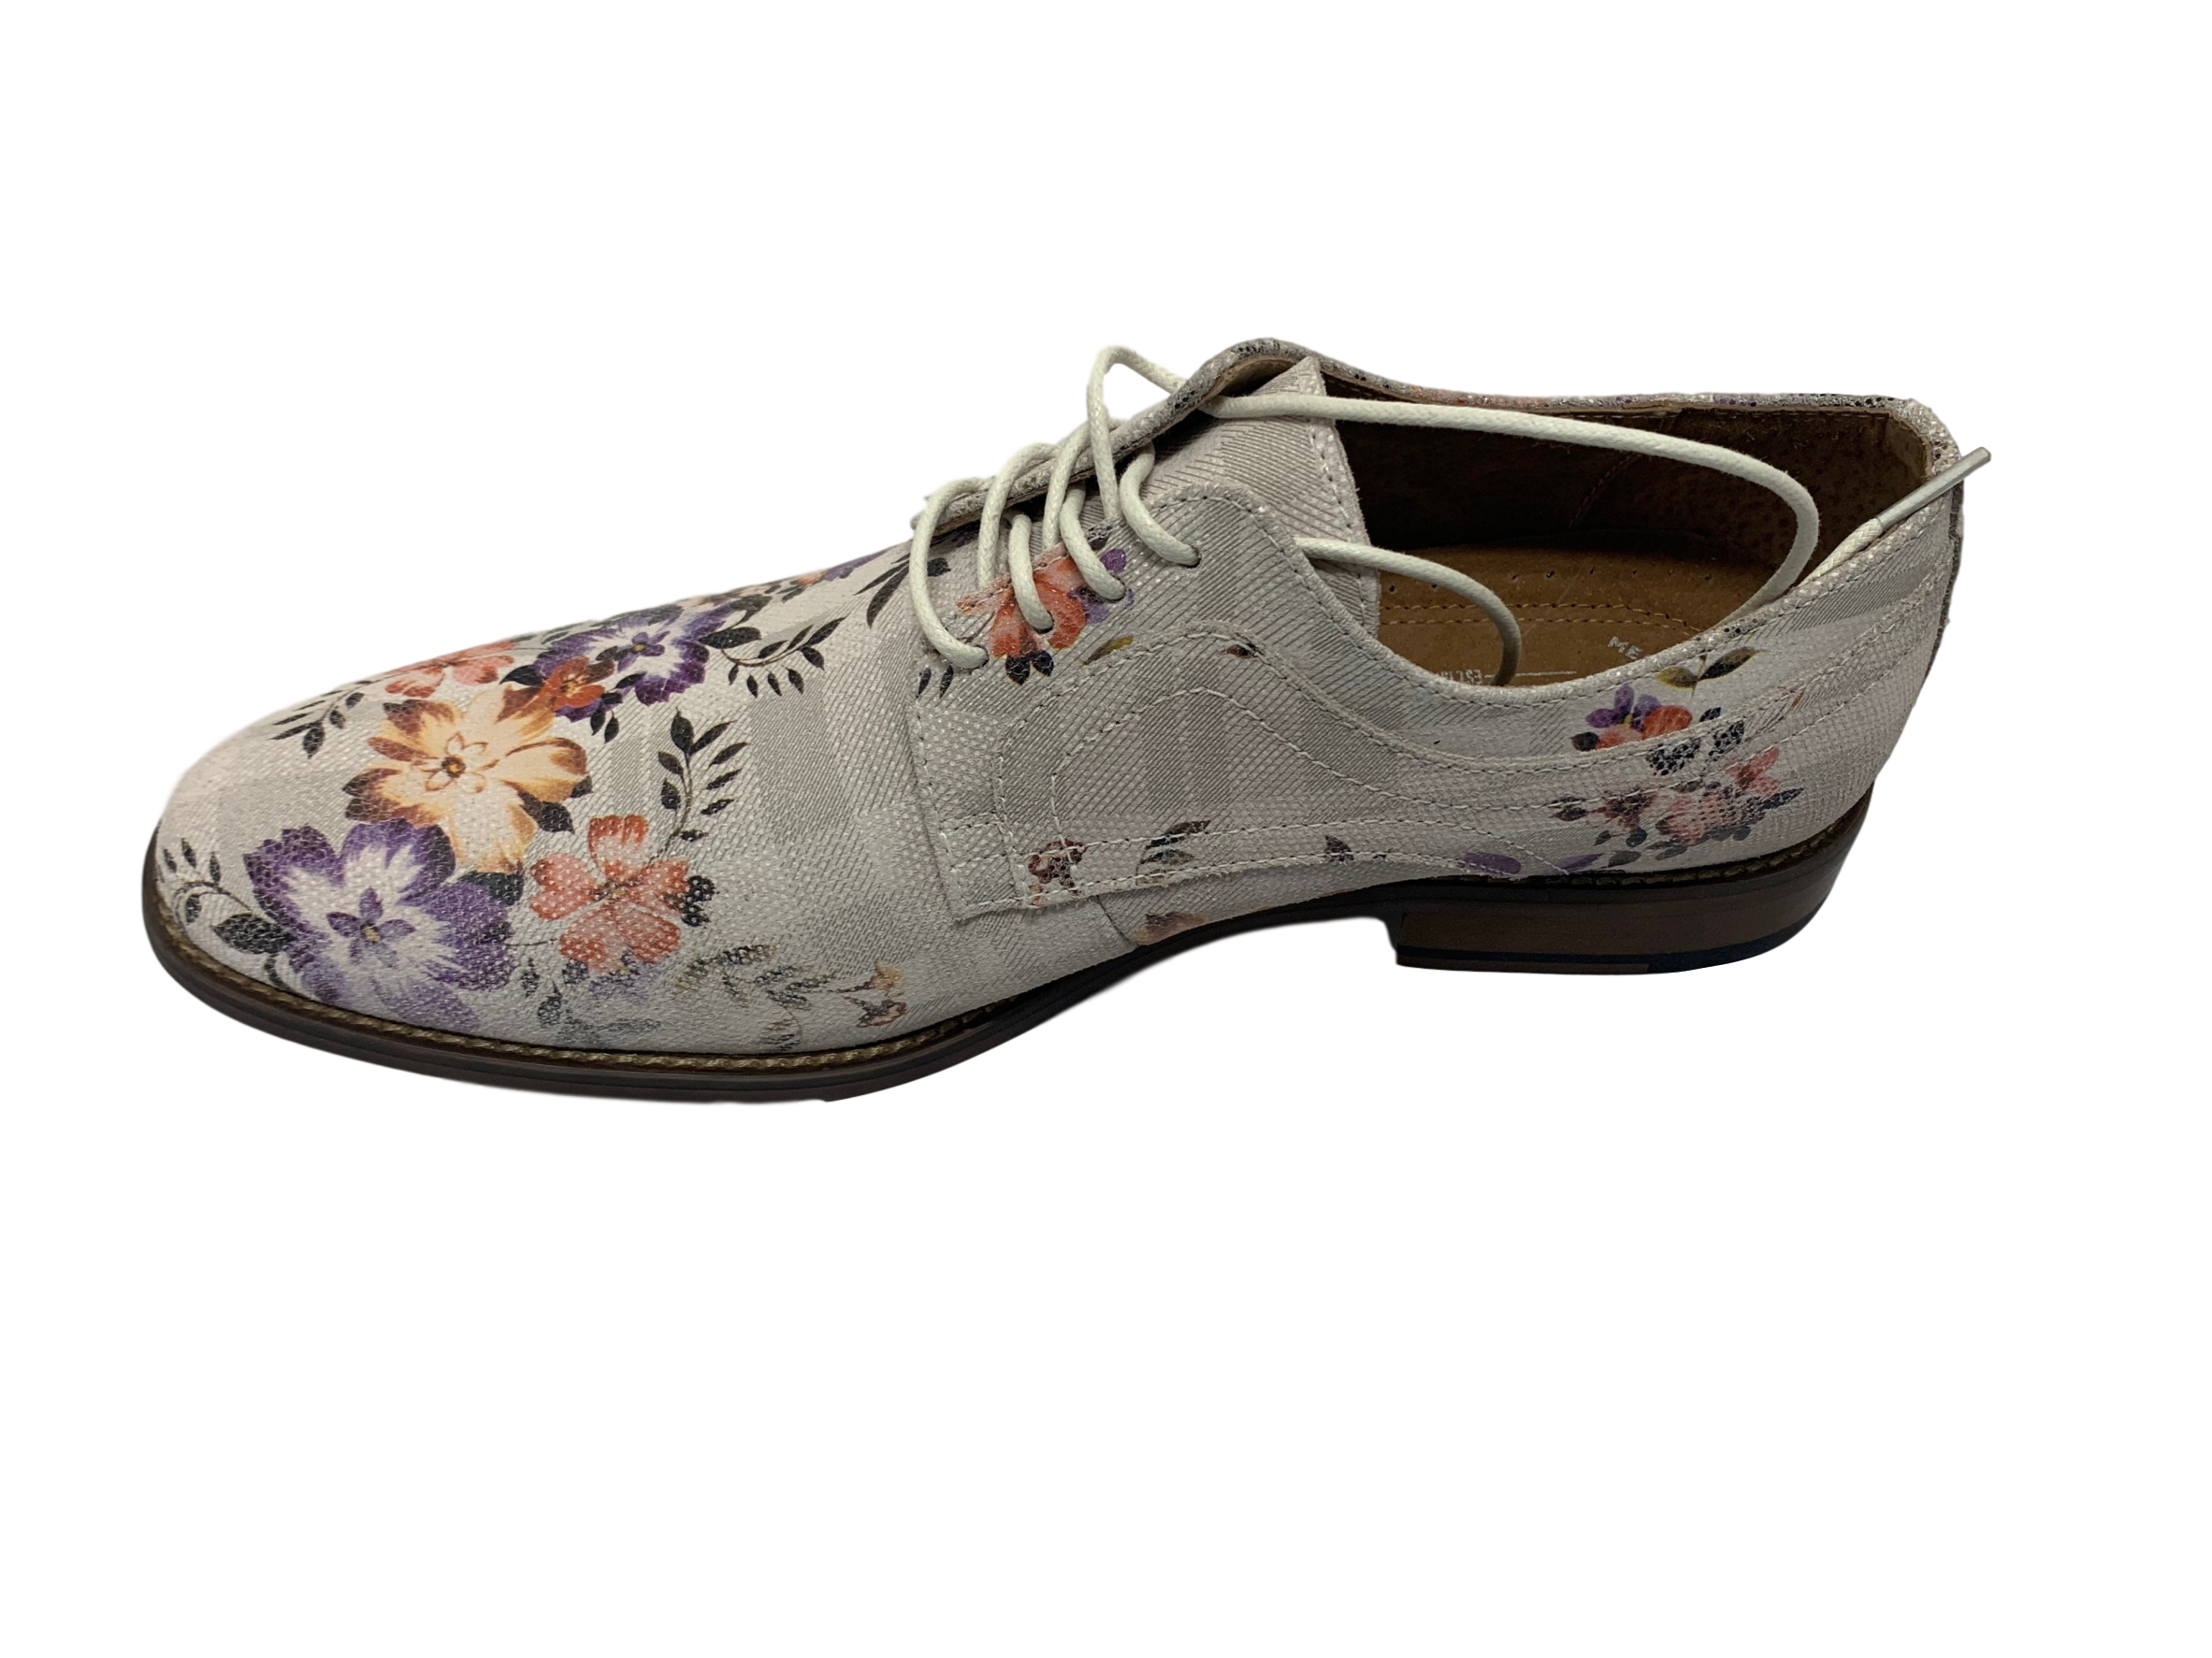 stacy adams floral shoes